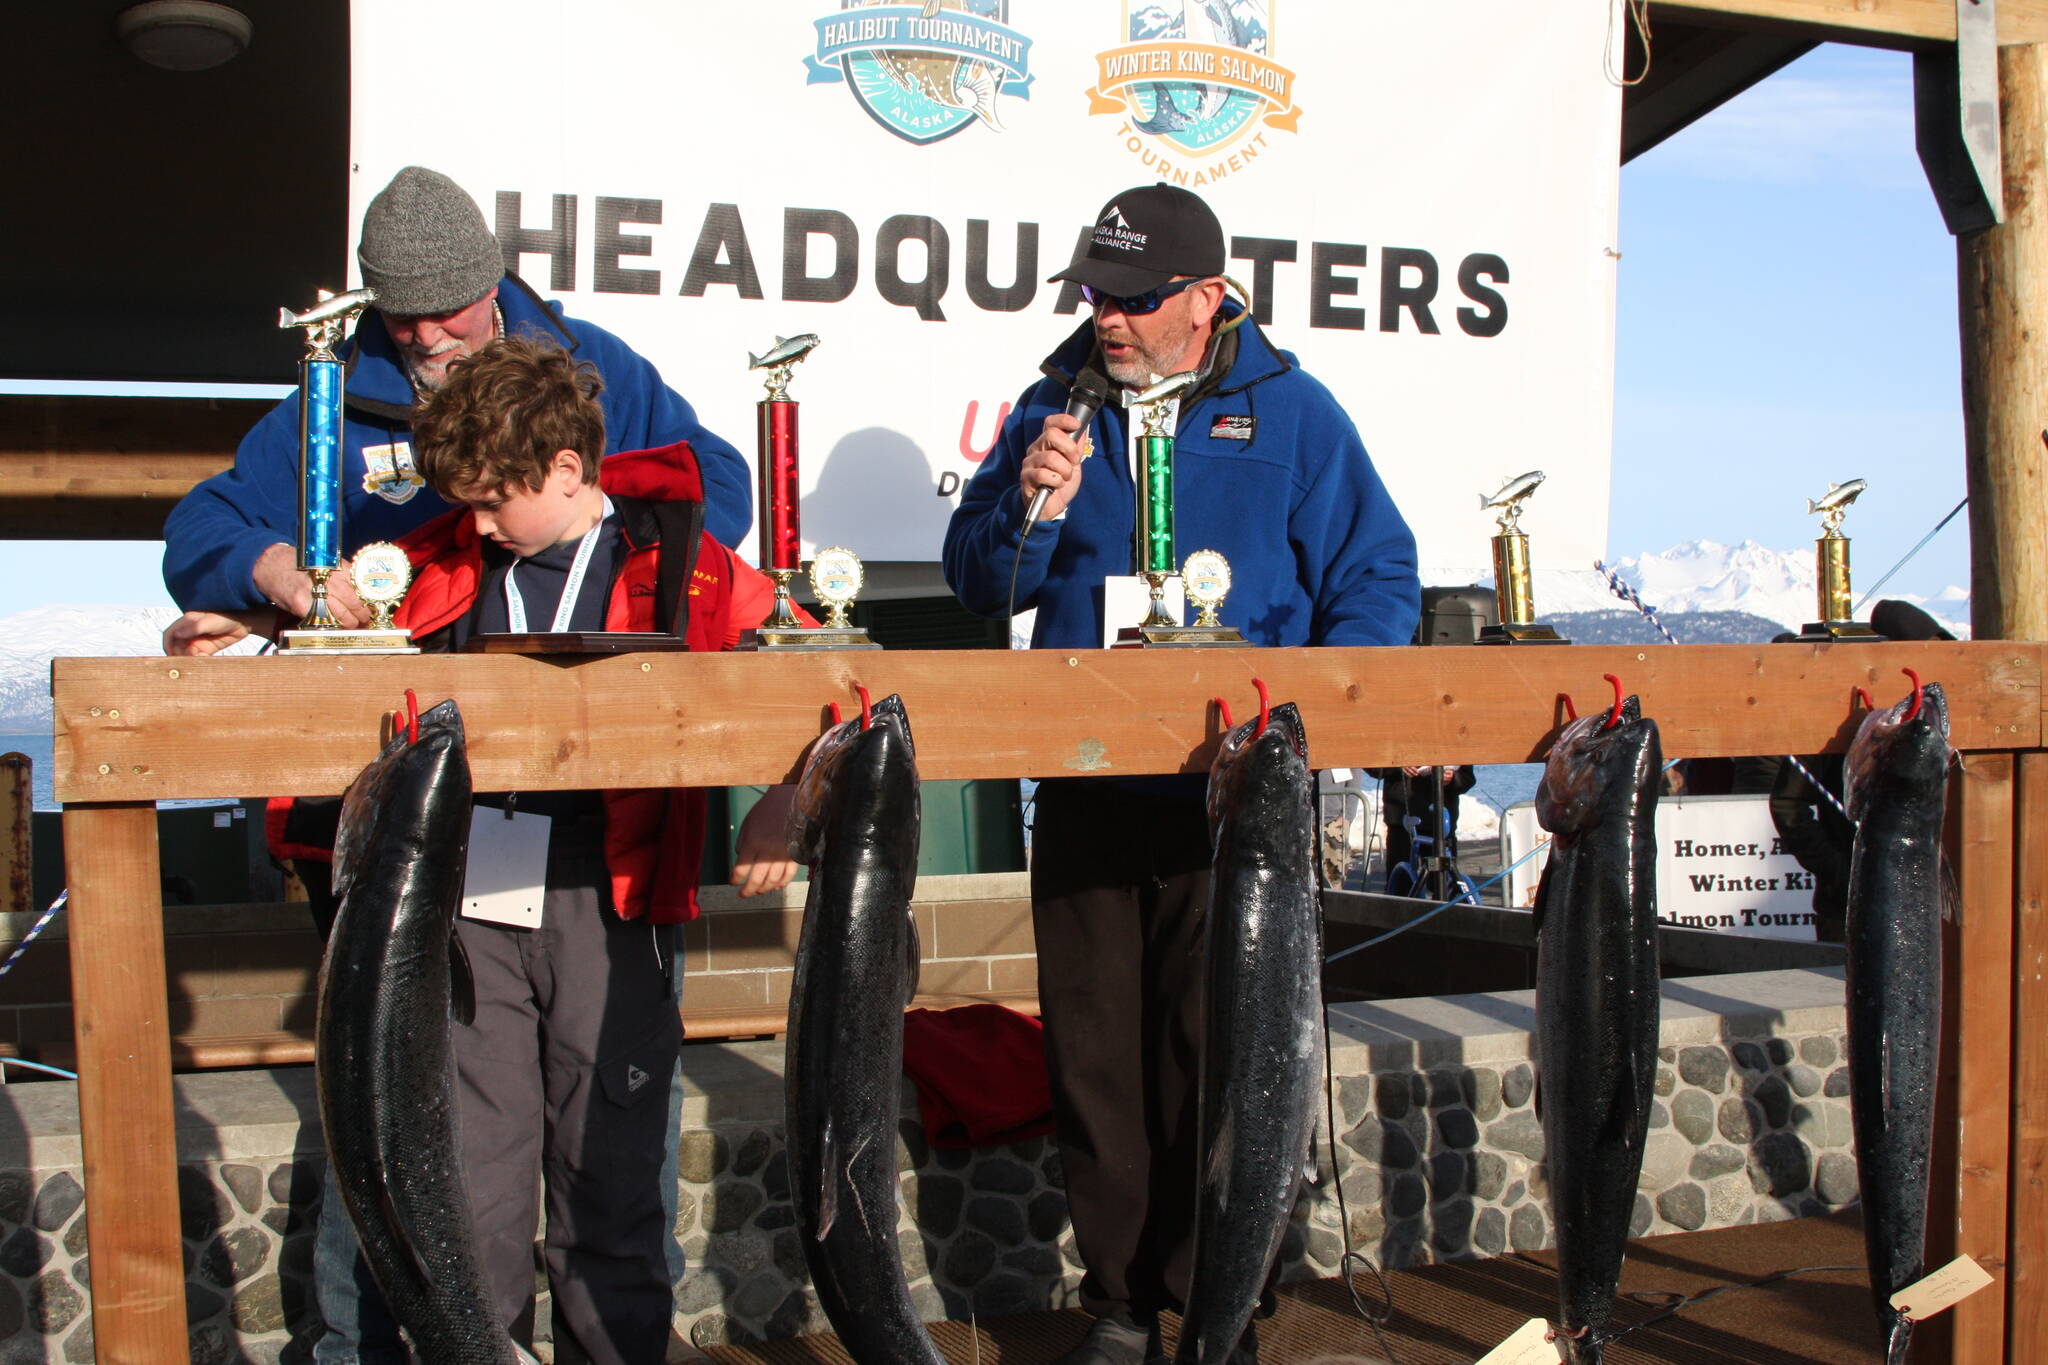 Top youth angler, nine year old Liam Carney, puts on his winner’s vest during the Homer Winter King Salmon Tournament awards ceremony on Saturday. Photo by Delcenia Cosman